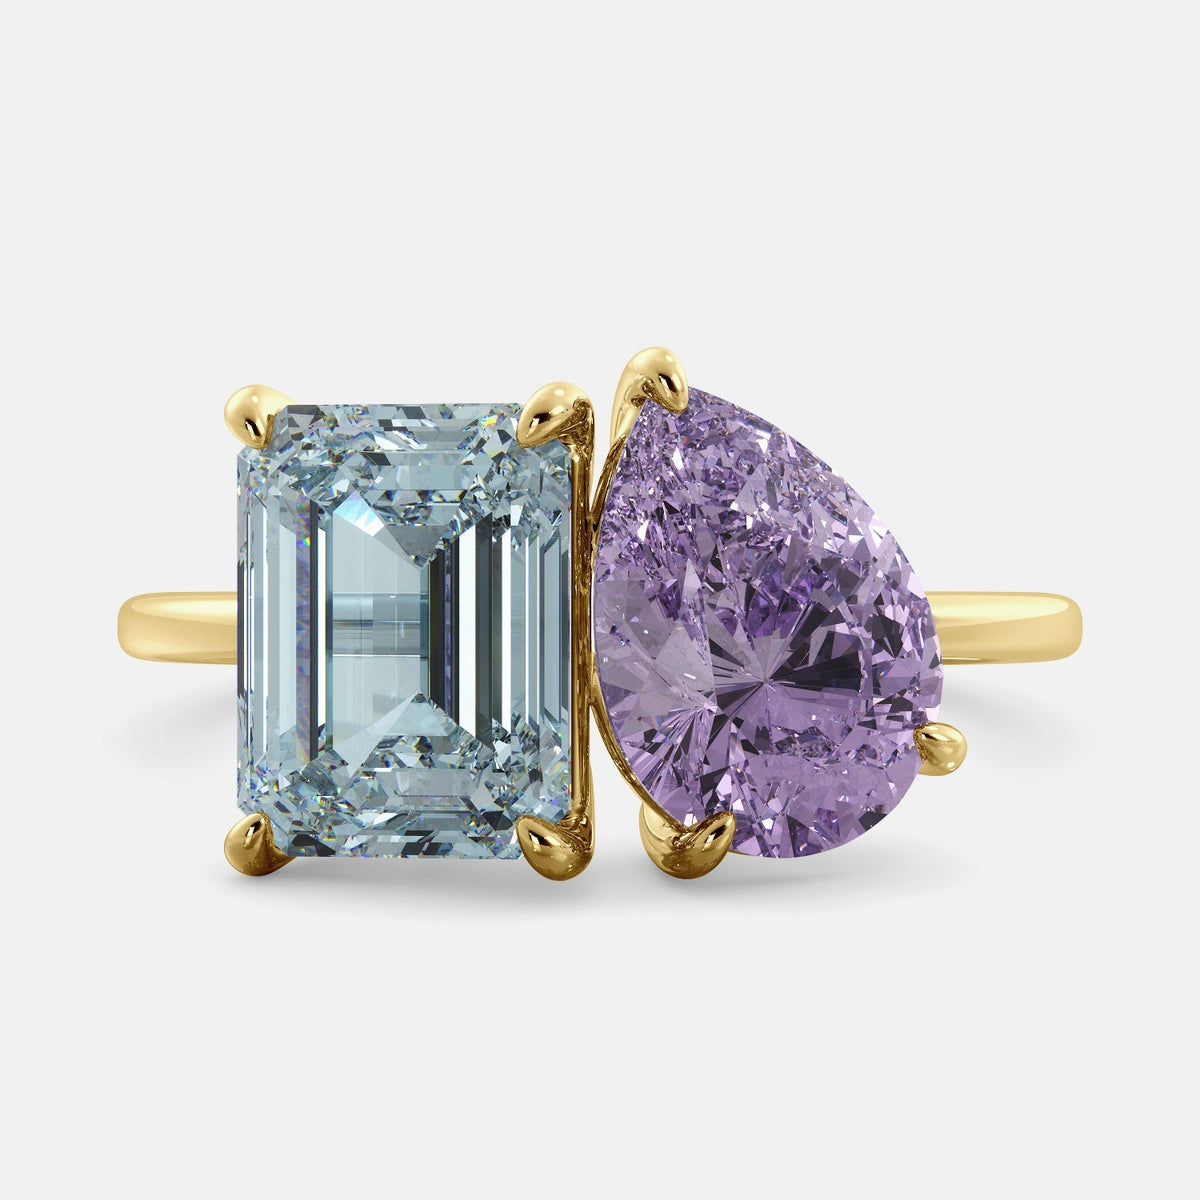 A toi et moi ring with an emerald cut aquamarine and a pear cut amethyst. The ring is set in a 14k yellow gold band and is available in all sizes. Aquamarine is a blue gemstone that is said to promote spiritual growth and strengthen self-confidence. Amethyst is a purple gemstone that is said to promote peace, love, and harmony. The toi et moi ring is a beautiful and unique way to show your love and commitment to someone special.